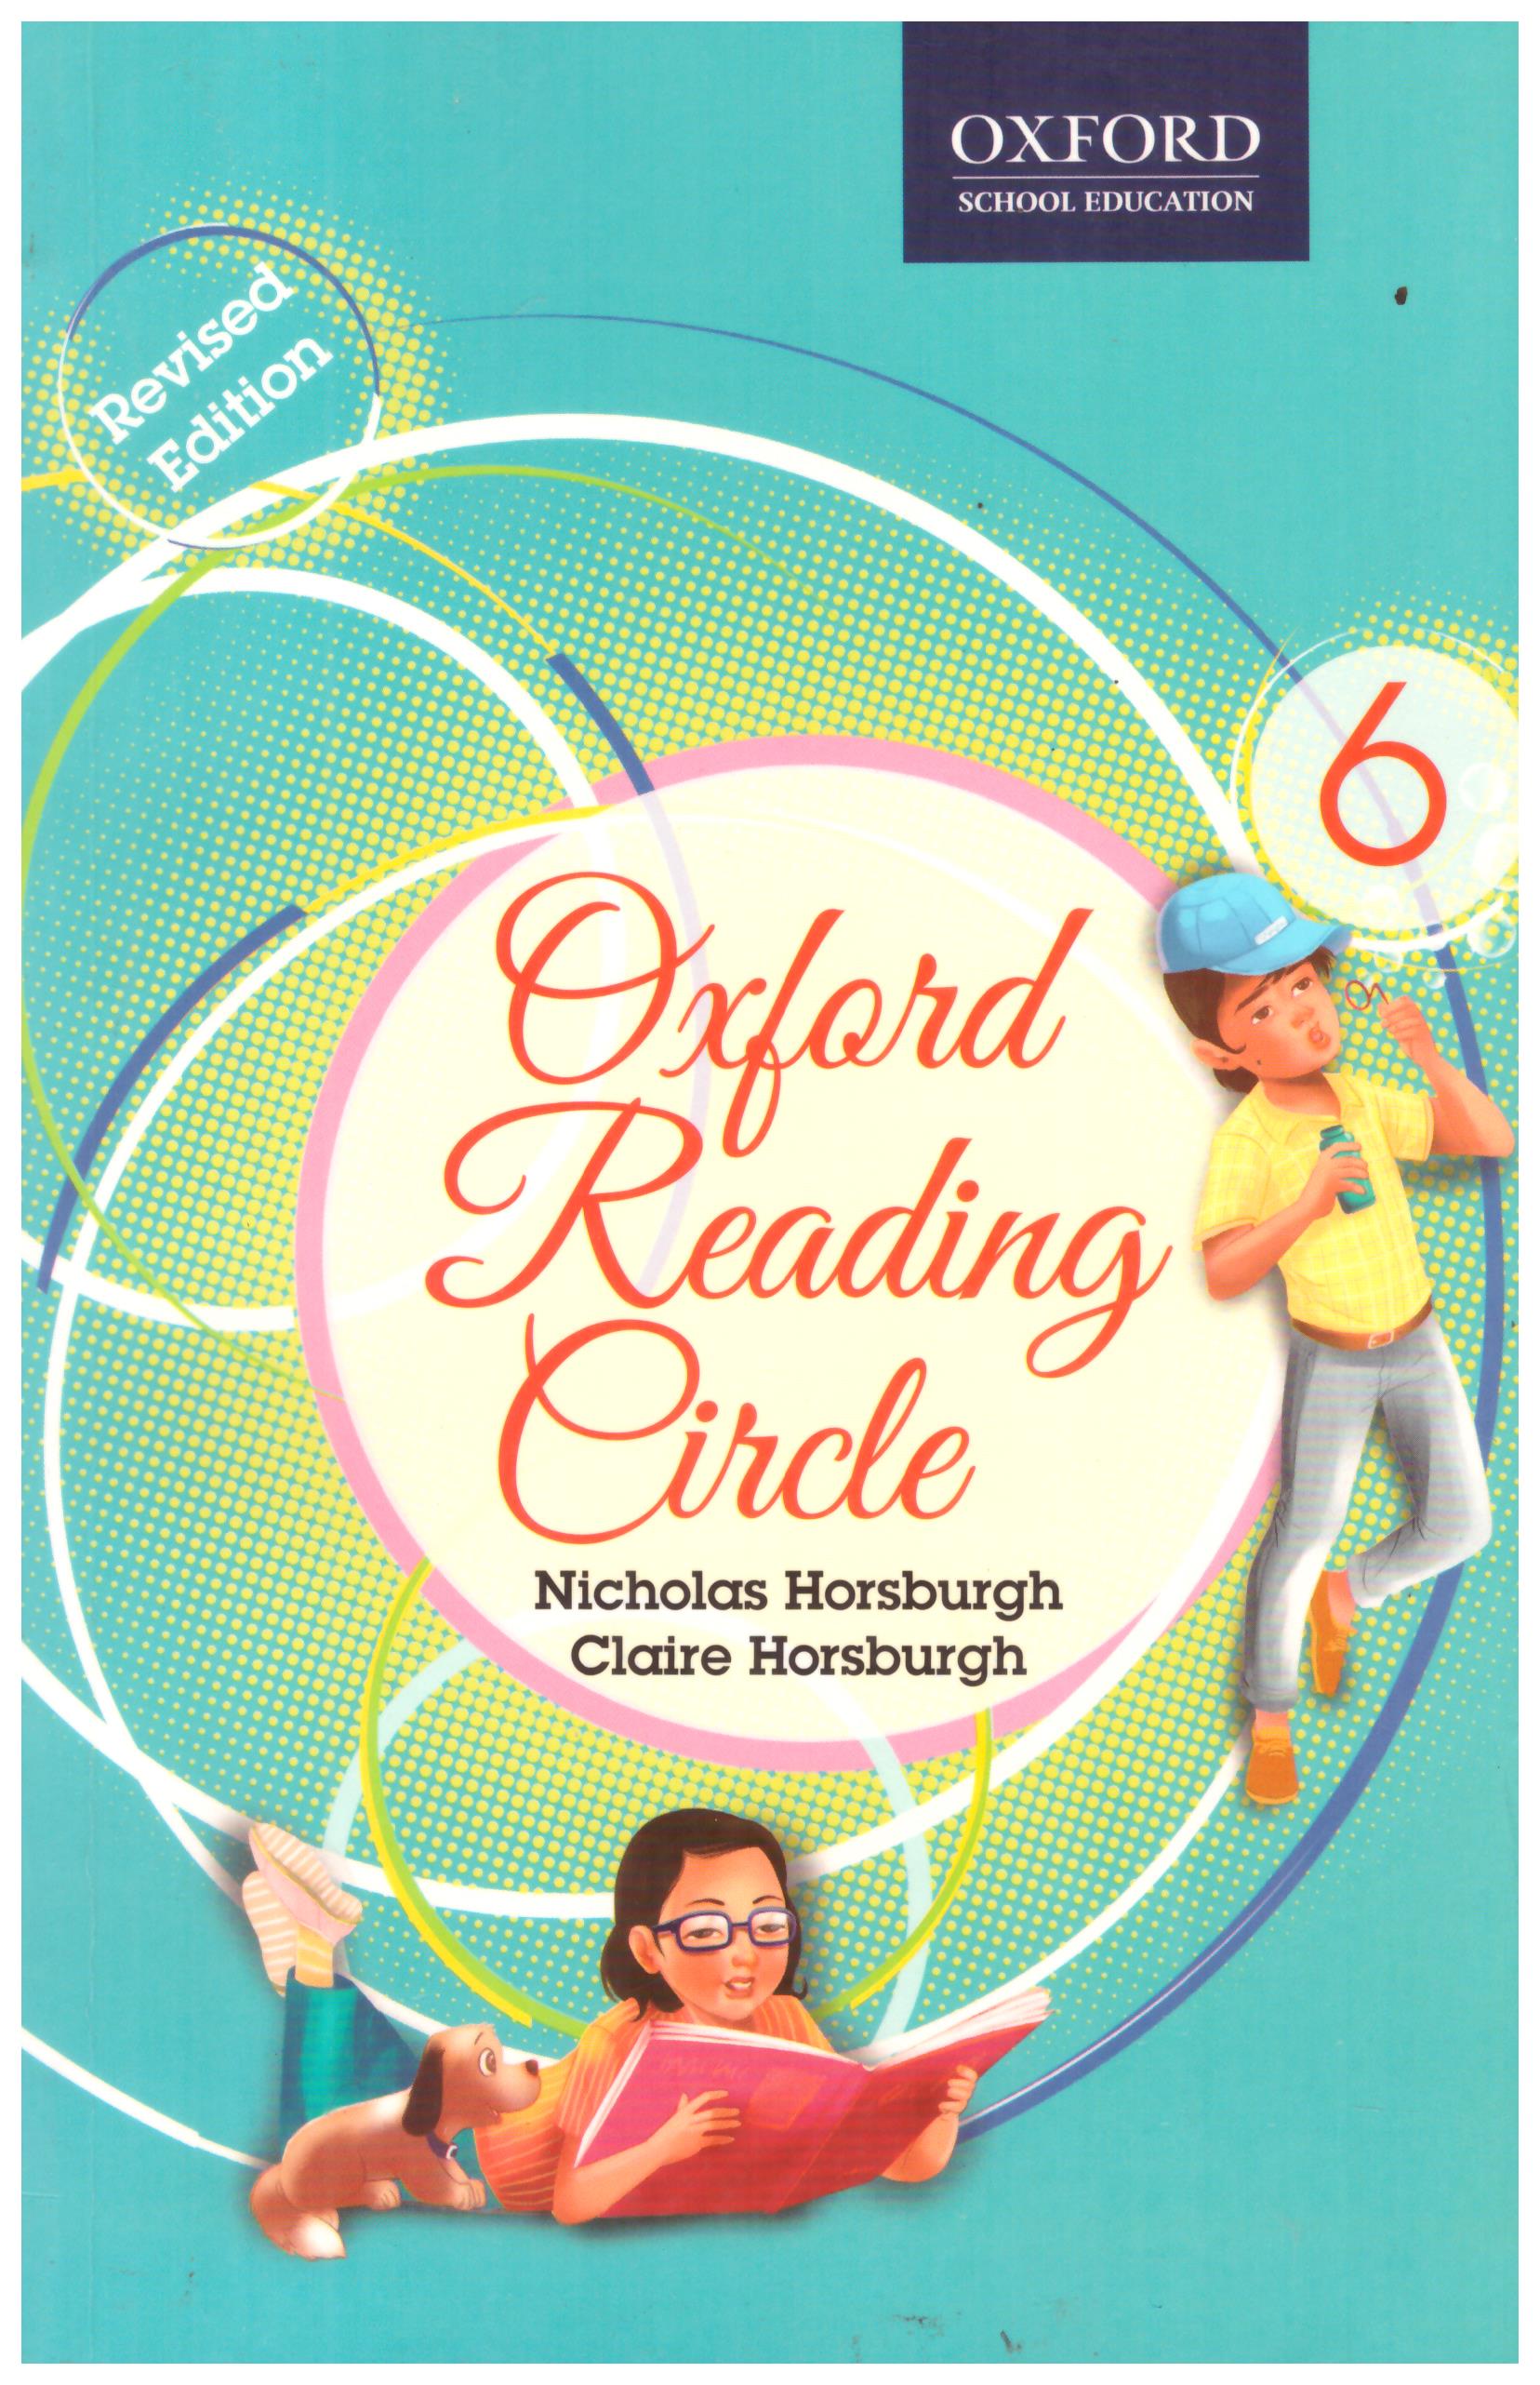 Oxford Reading Circle Book- 6  (Revised Edition)